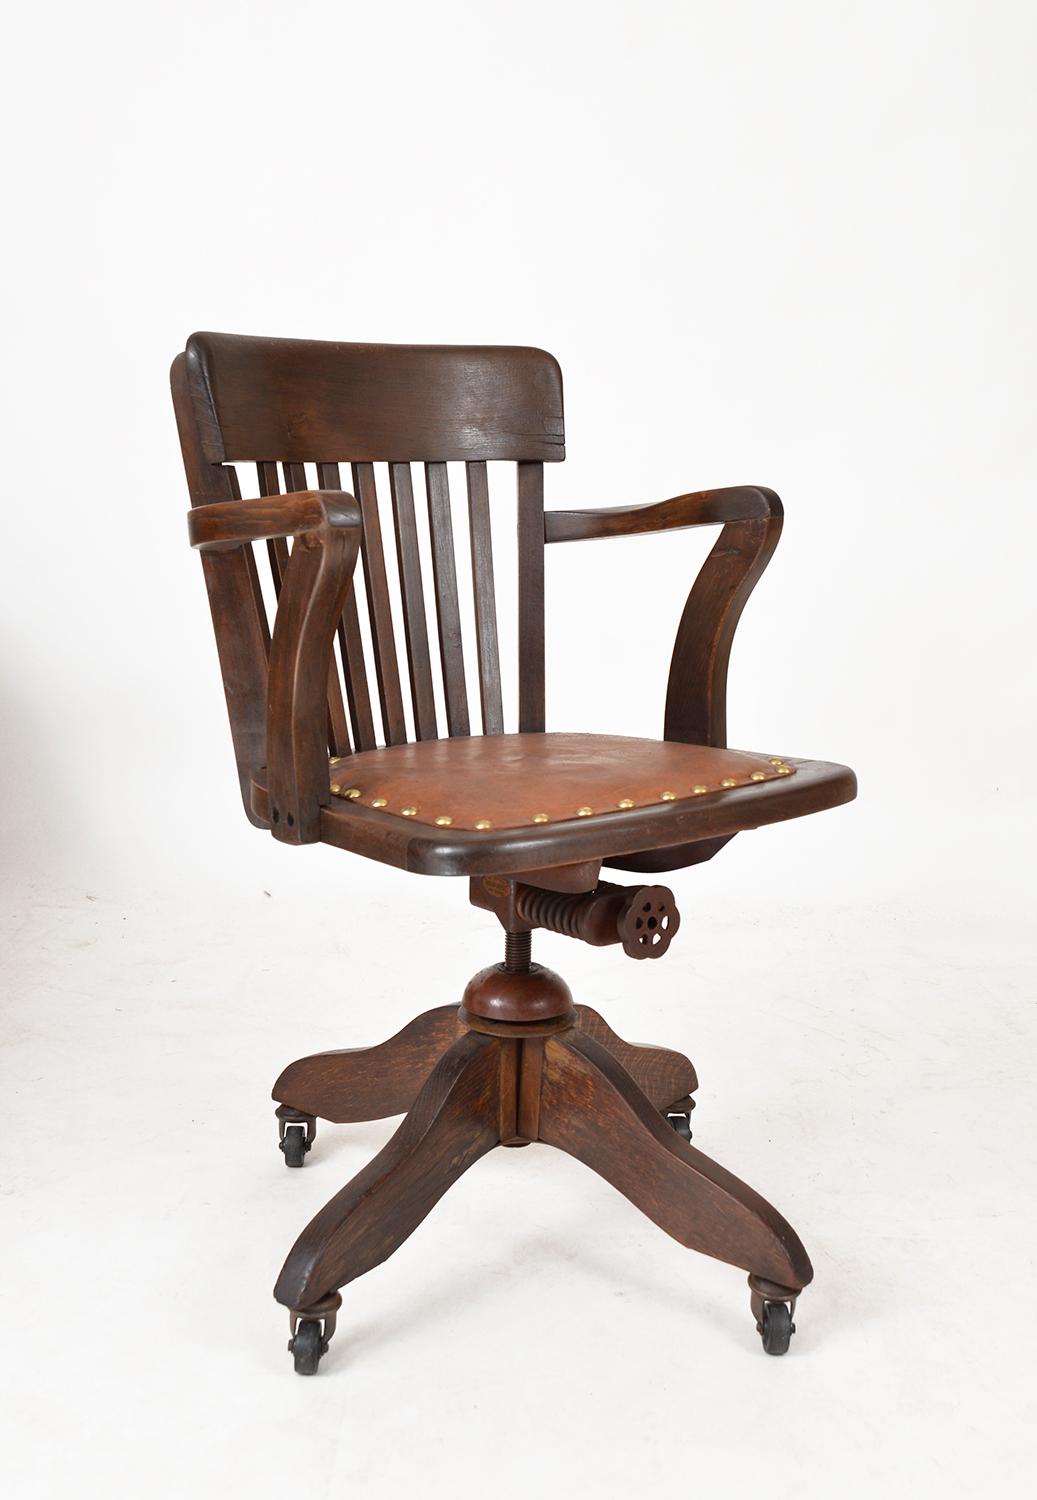 A fantastic example of a 1920s/30s oak and leather 